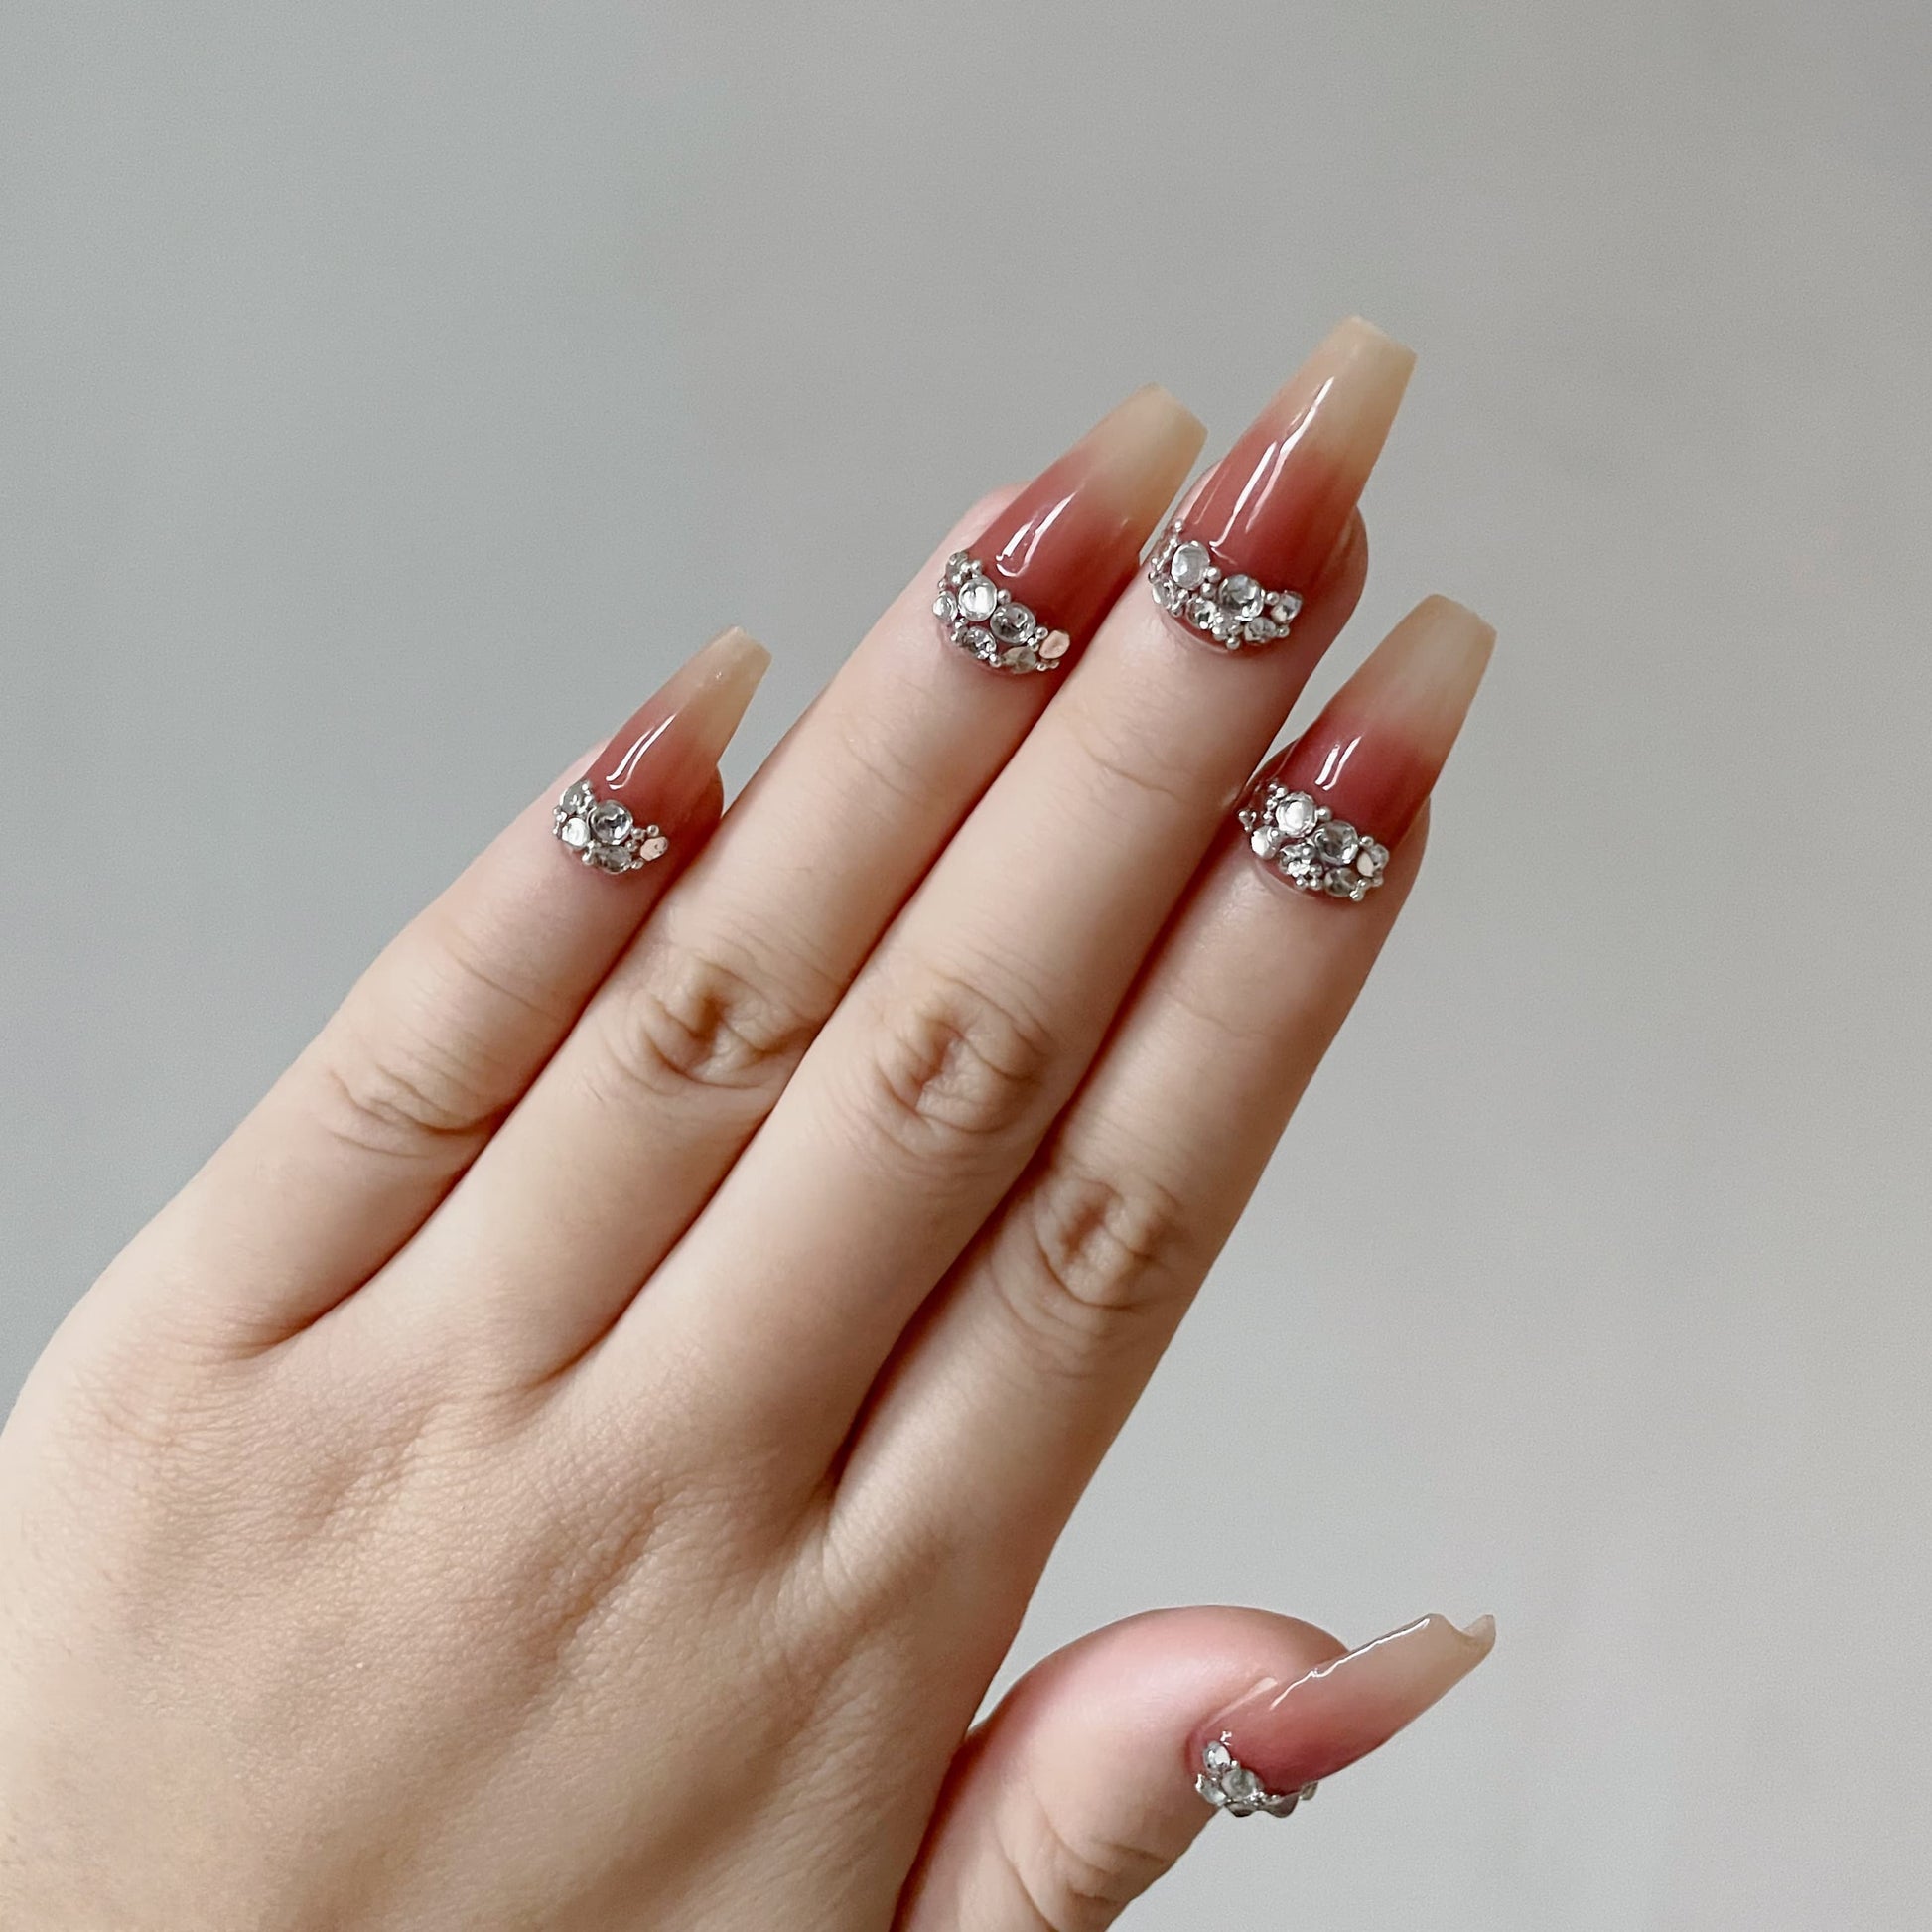 French Tip Press on Nails Long with Rhinestone Designs, 3D Luxury